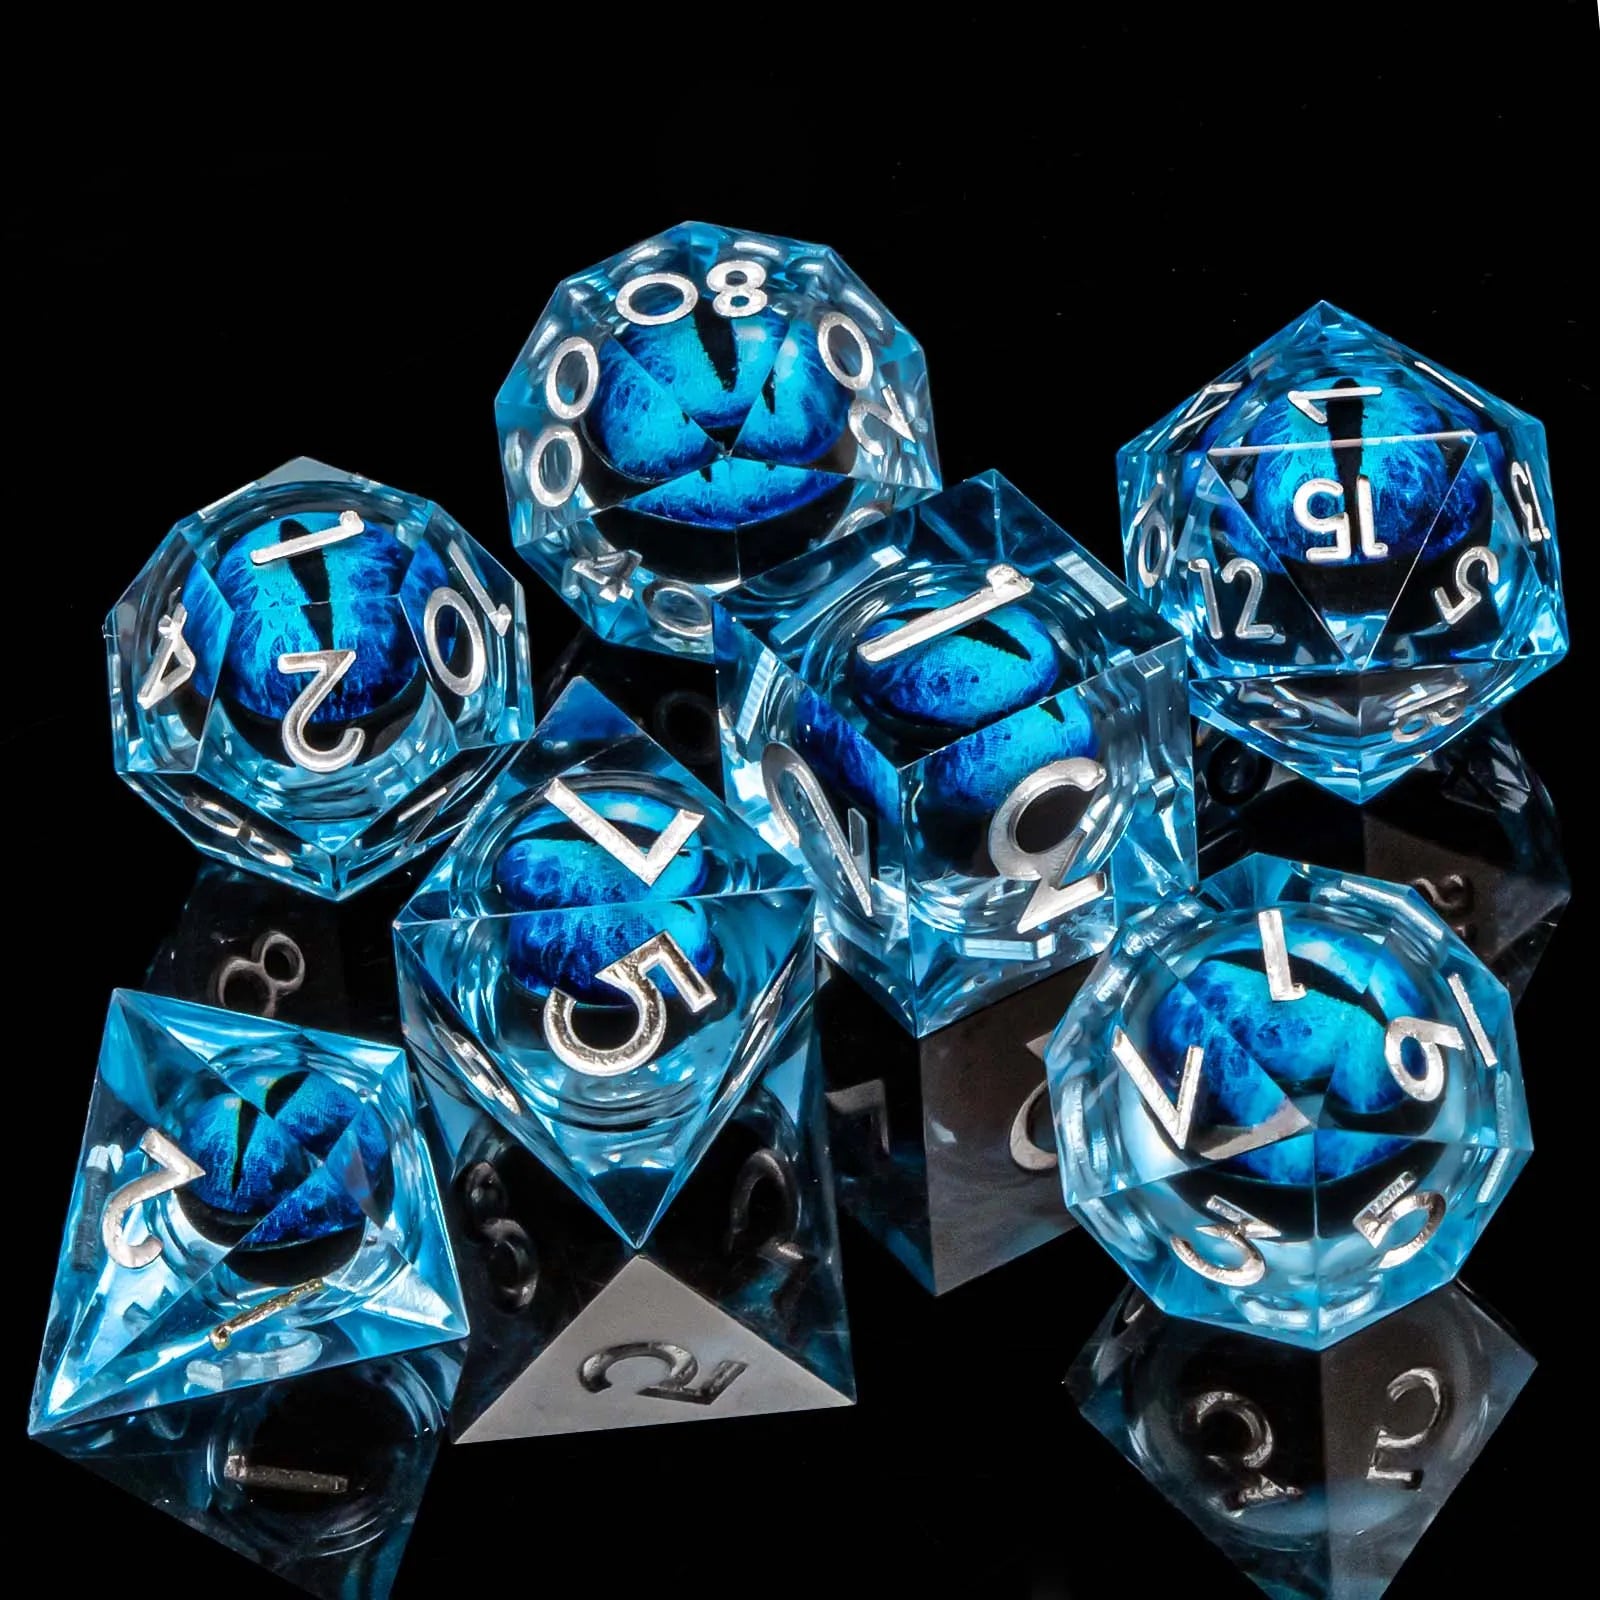 DND Eye Liquid Flow Core Resin D&D Dice Set For D and D Dungeon and Dragon Pathfinder Table Role Playing Game Polyhedral Dice AZ11